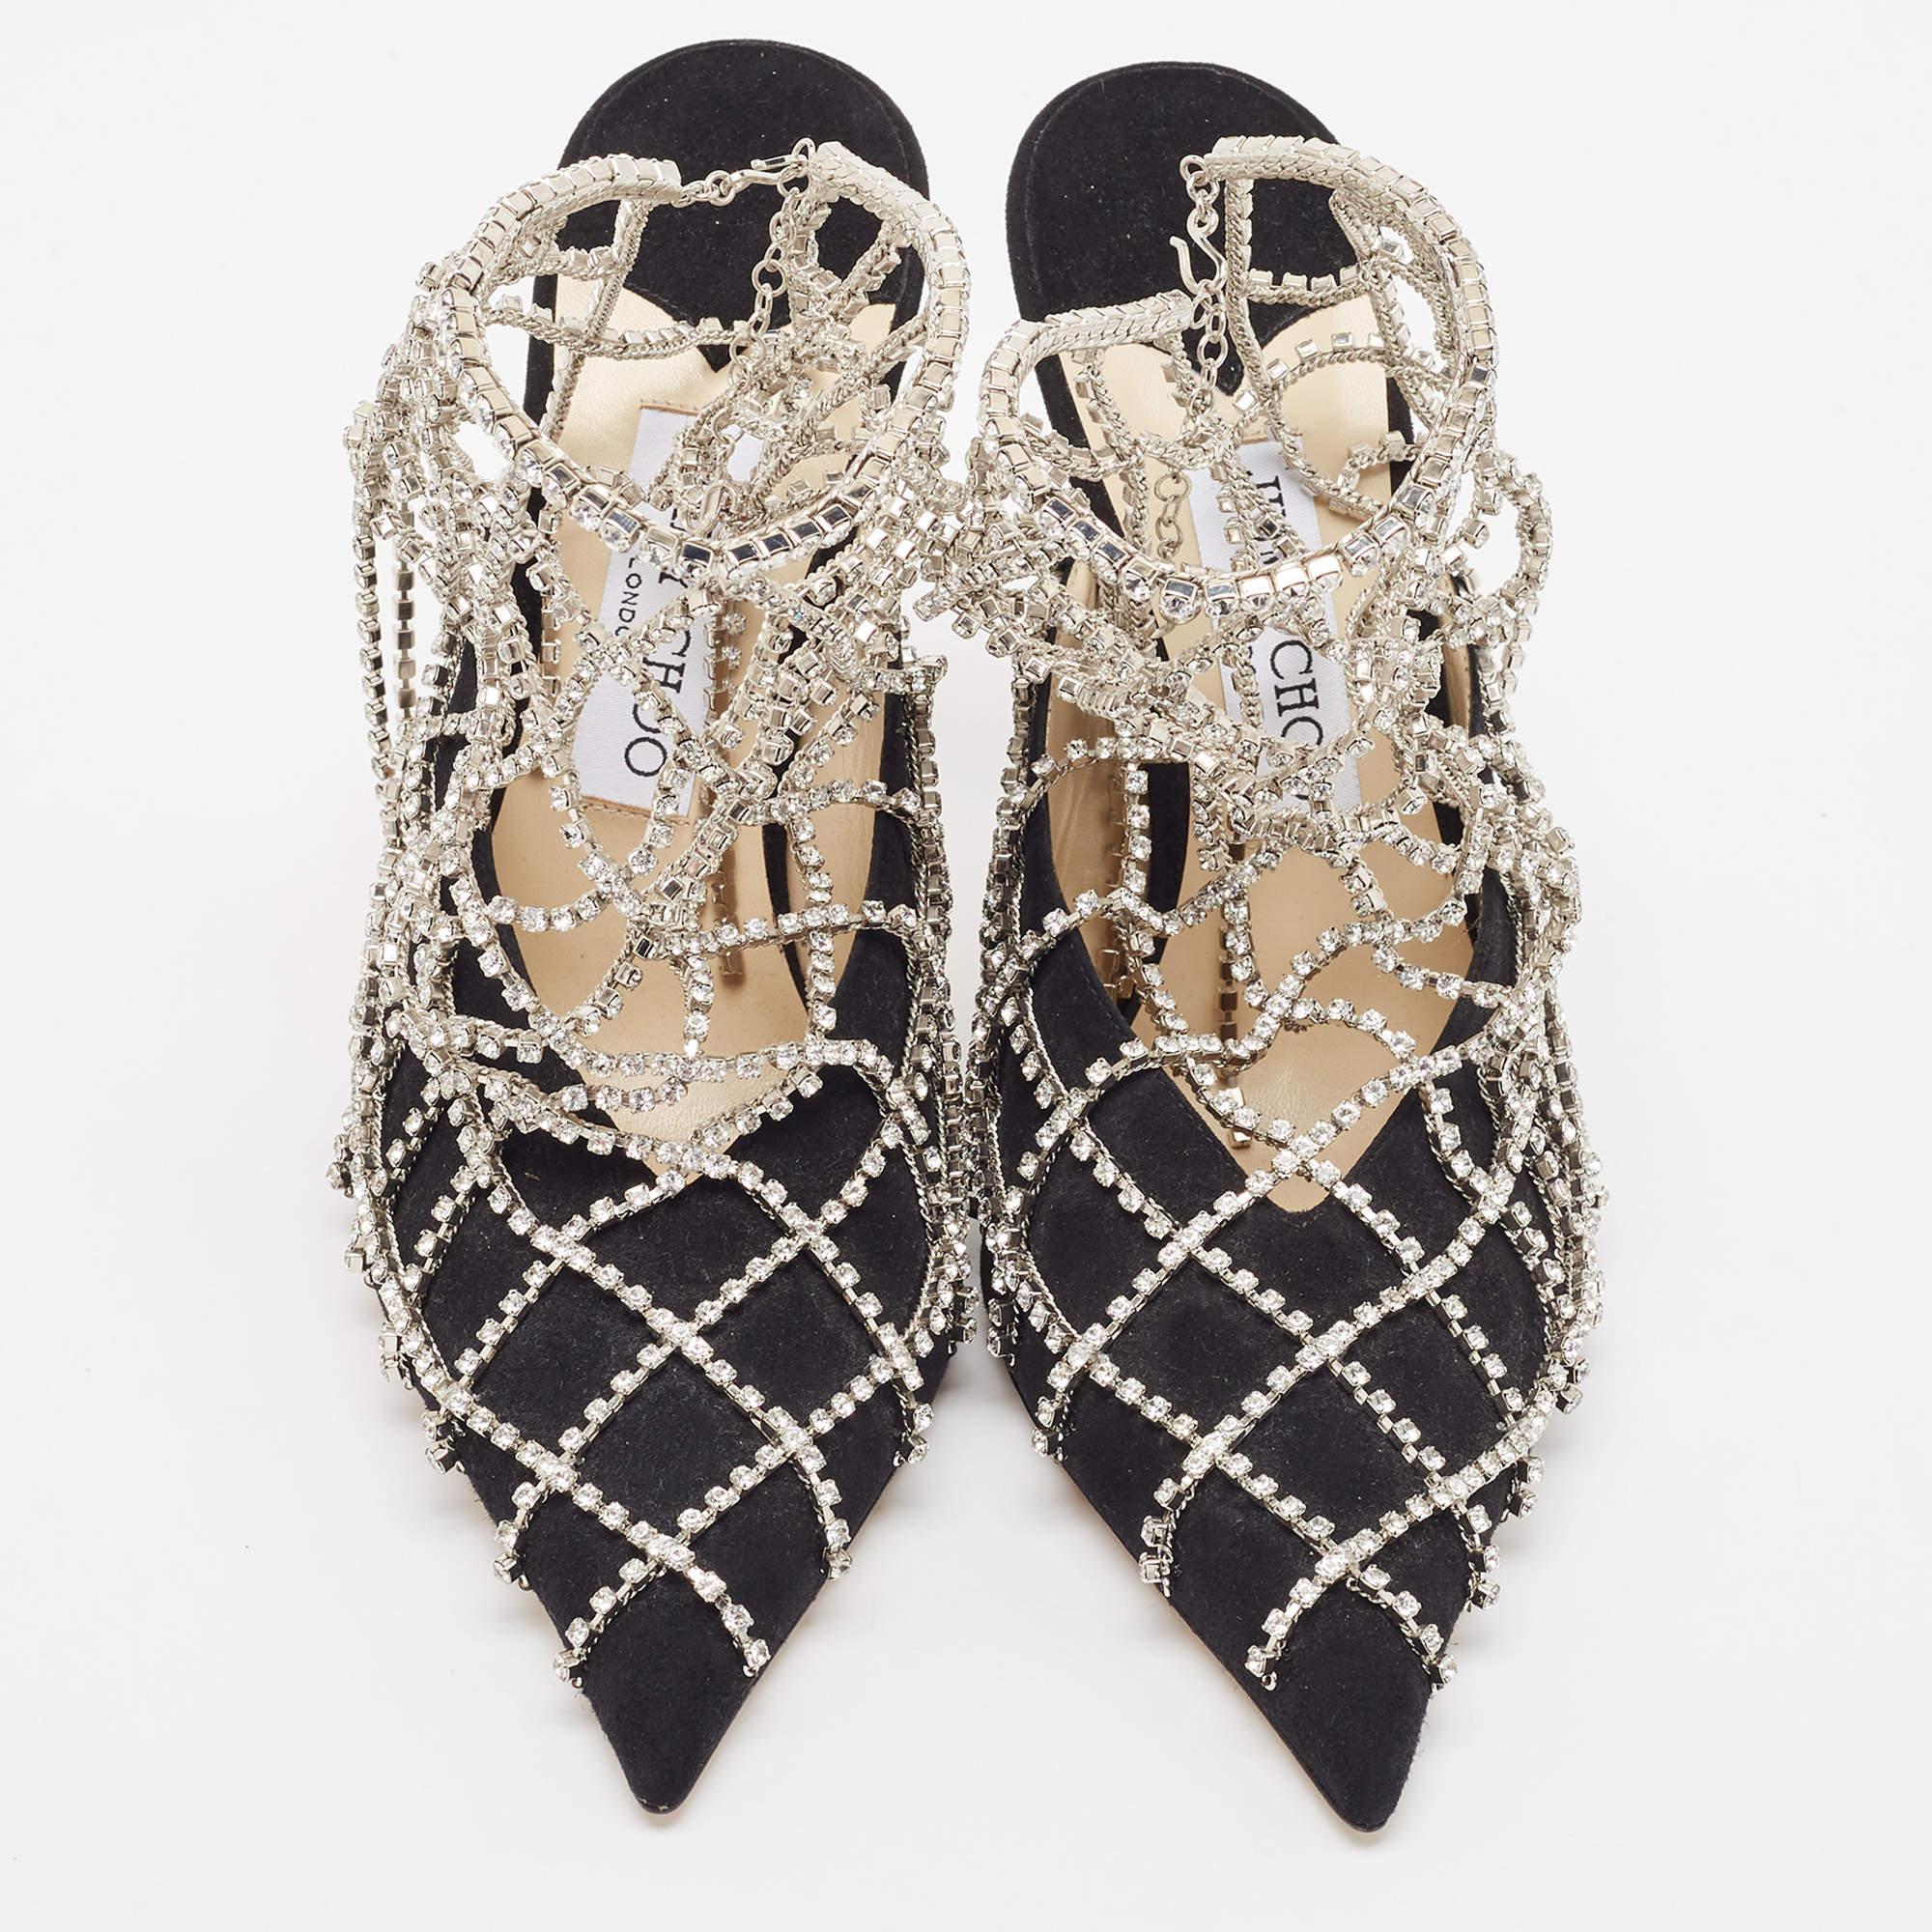 Jimmy Choo yet again brings a stunning pair of pumps that makes us marvel at its beauty and craftsmanship. Crafted from black suede, they are cloaked with a panel of crystal embellishments for the right amount of sheen! Wear these shoes to nail the